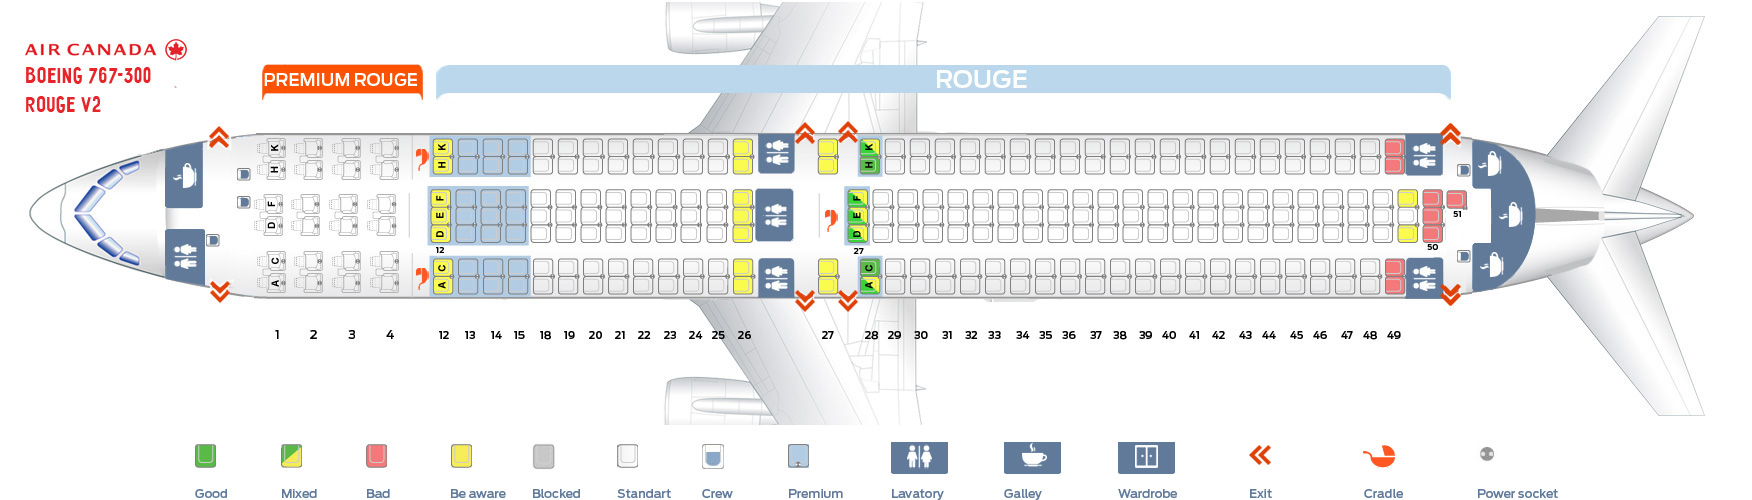 Seat map Boeing 767300 Air Canada. Best seats in plane